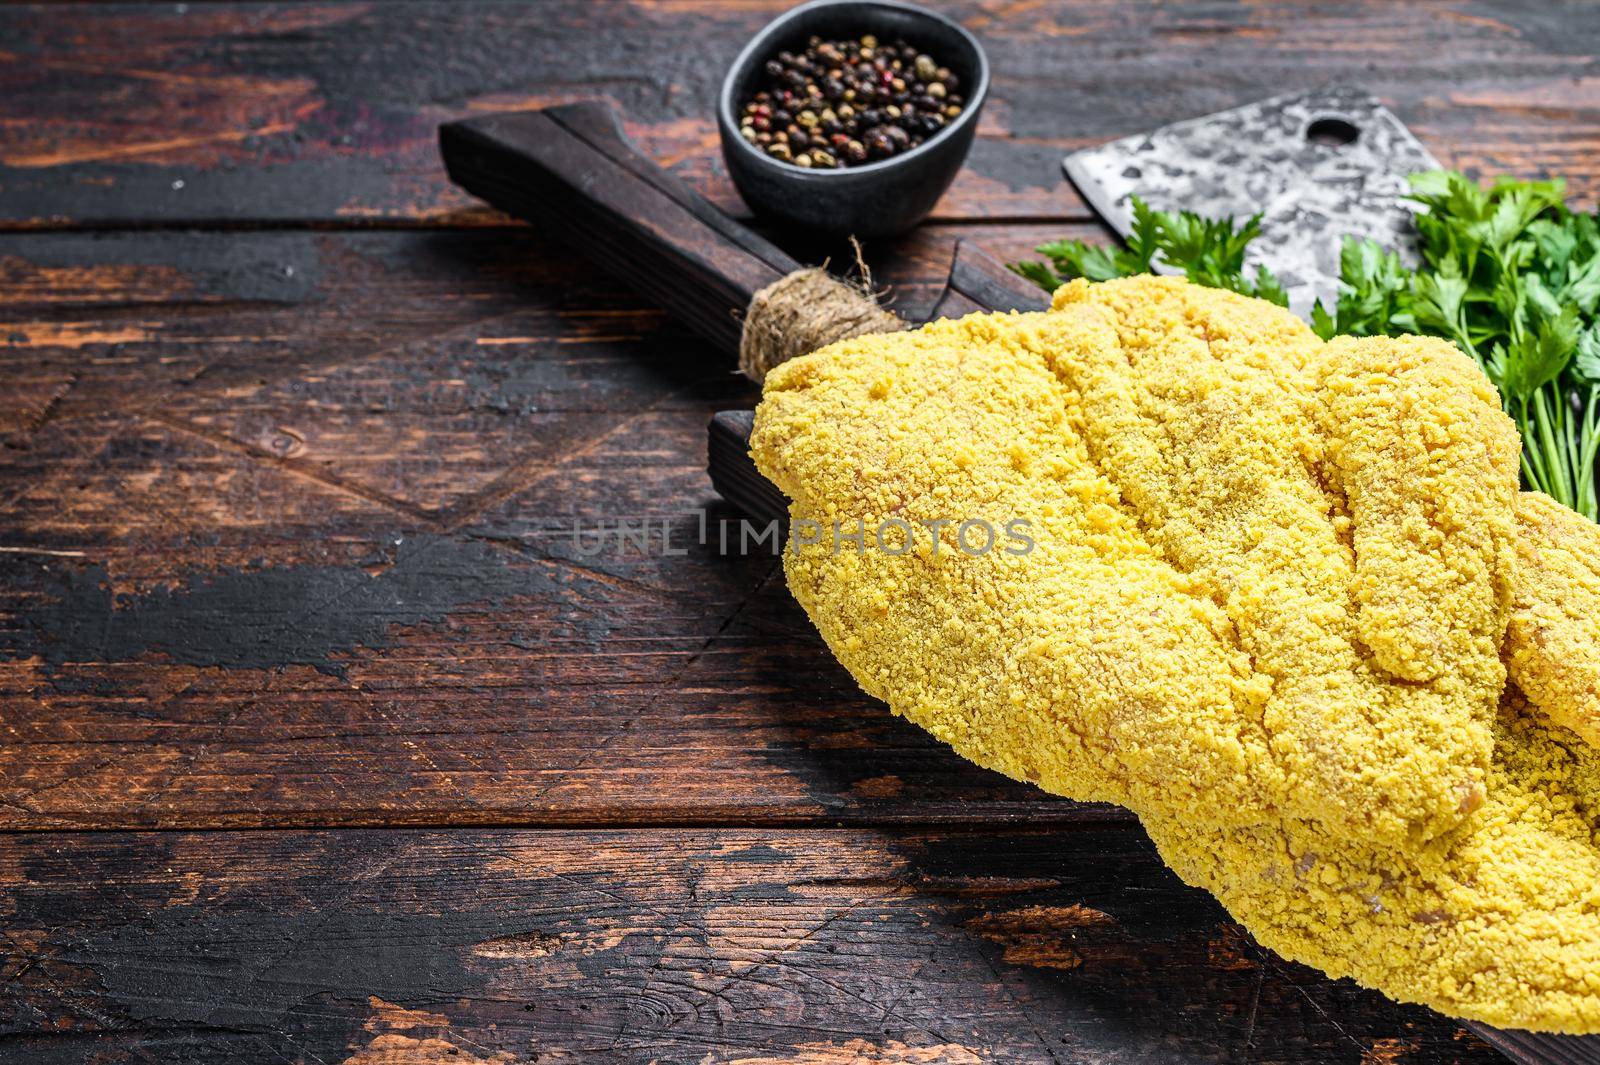 Raw large Viennese schnitzel on a cutting board. Black wooden background. Top view. Copy space.